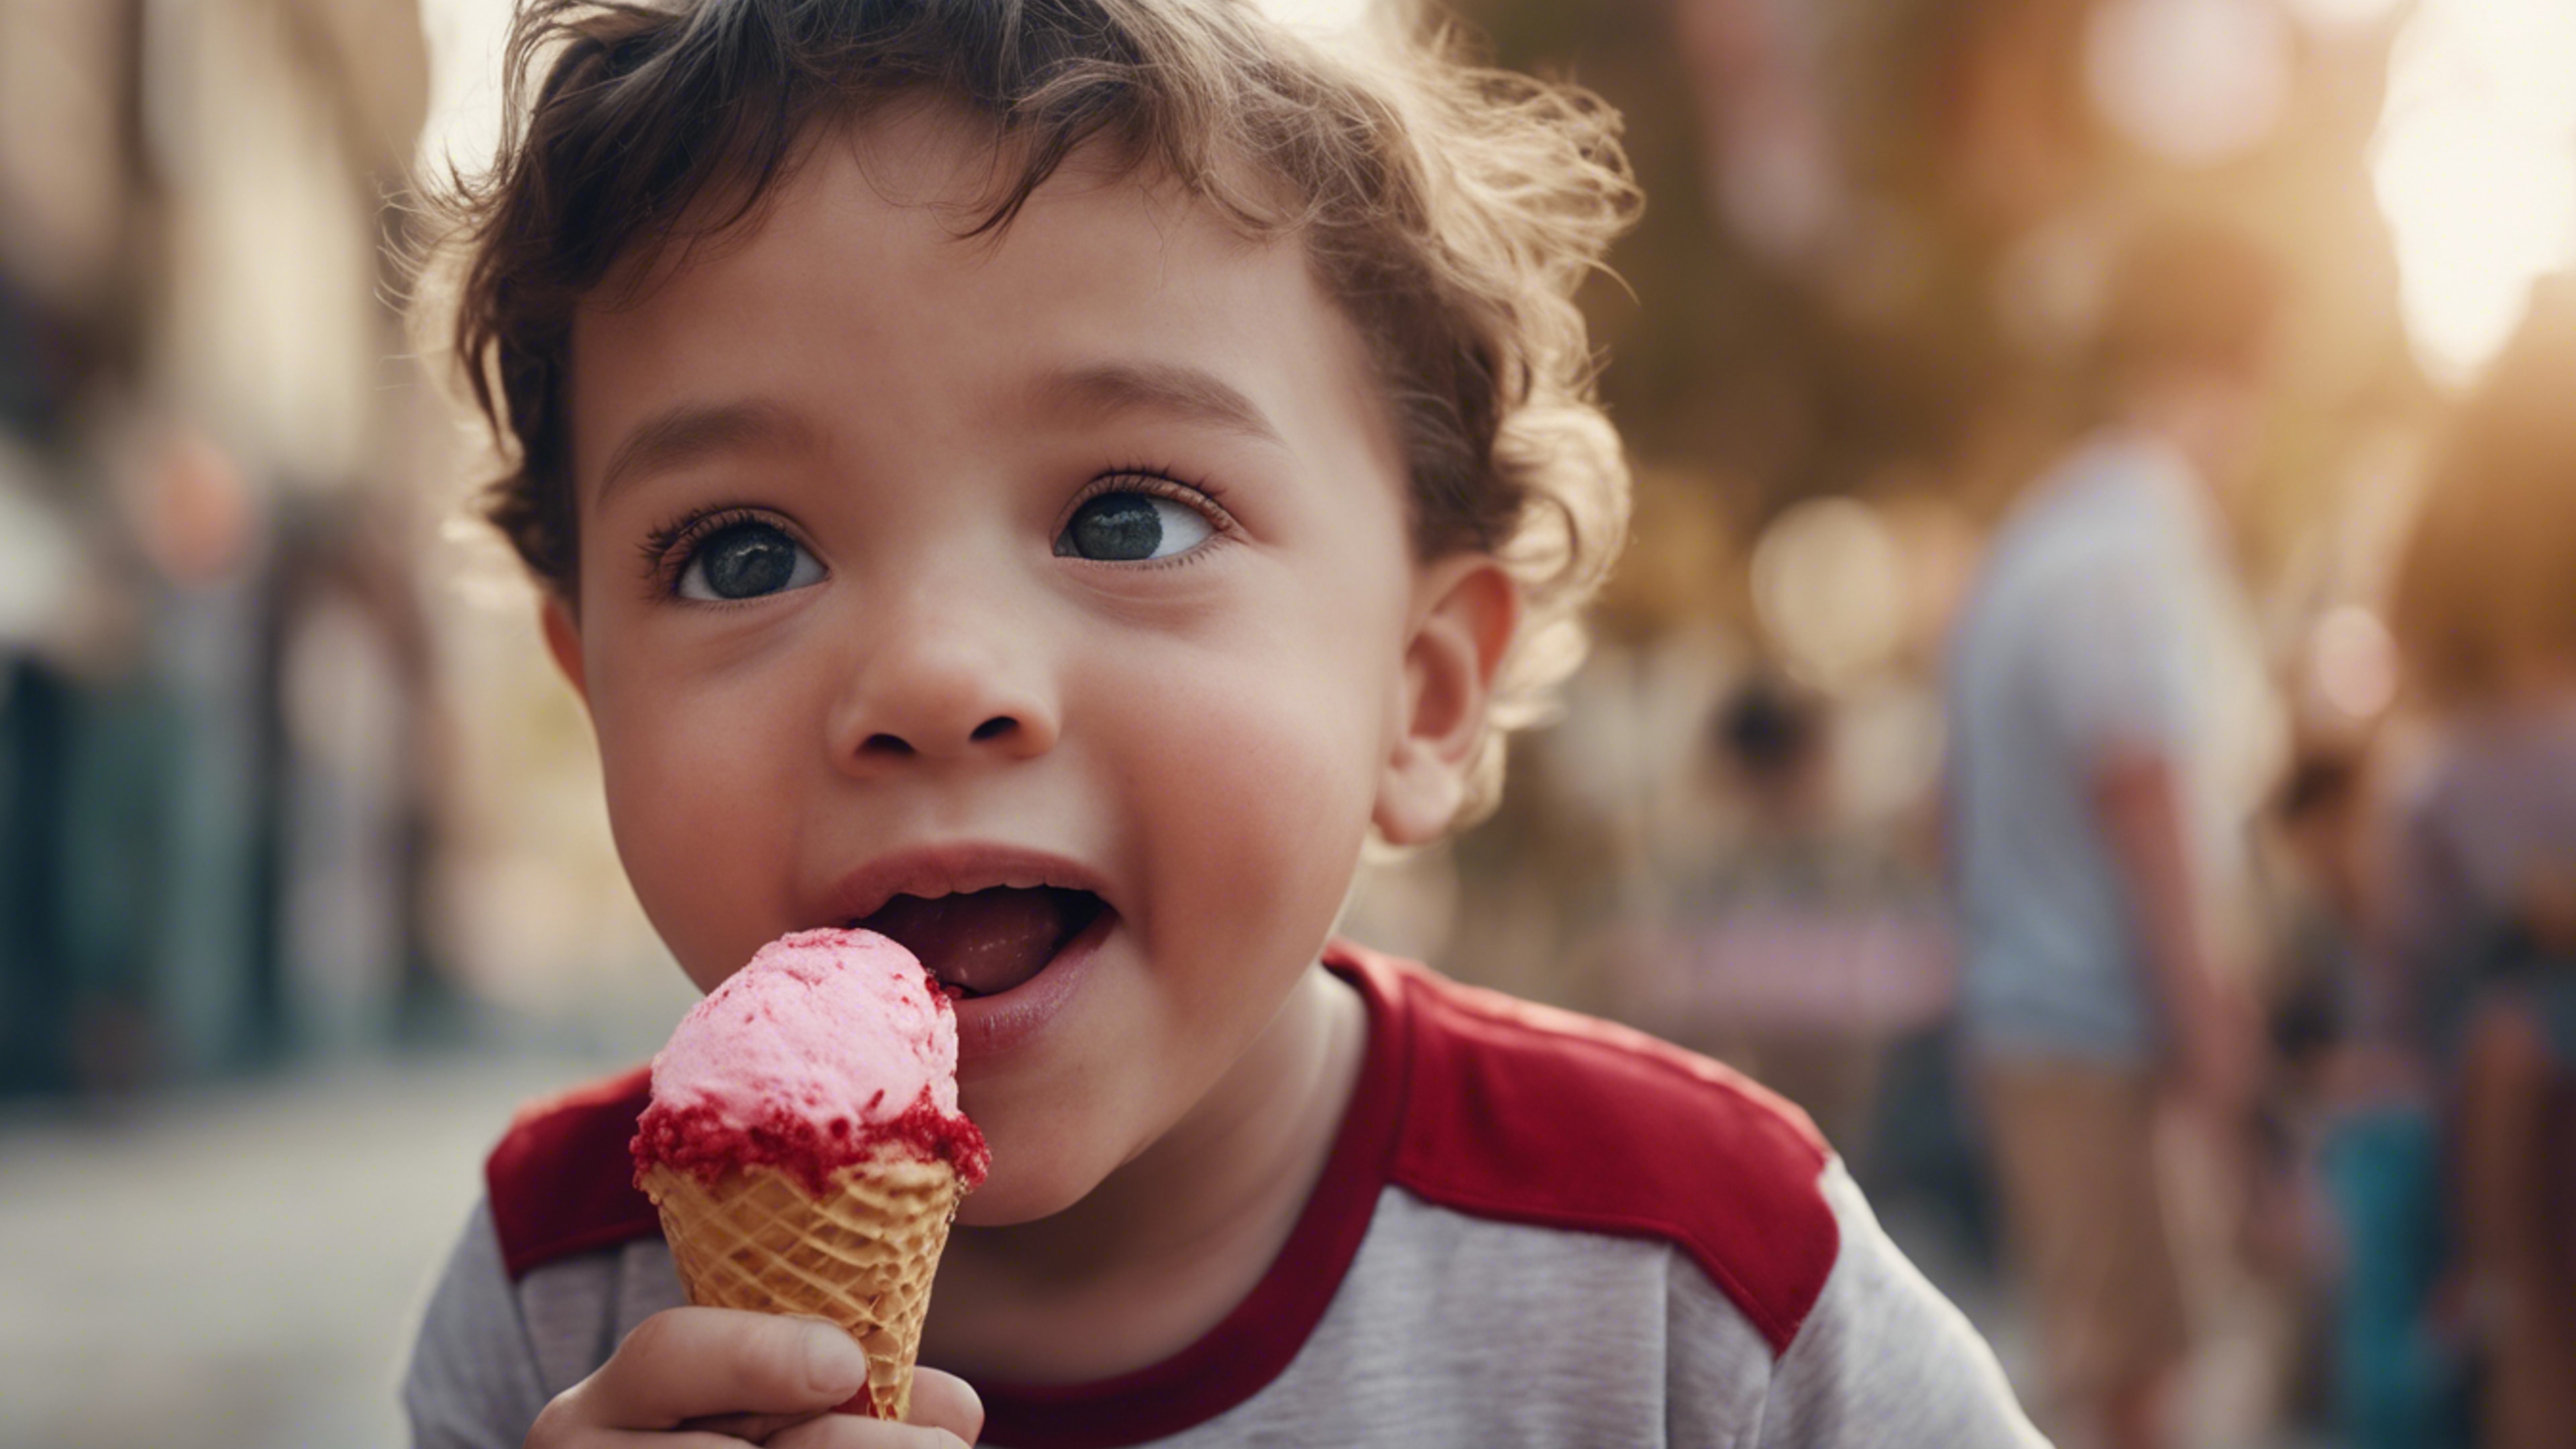 A small child delighting in a red velvet ice cream cone, with a wide-eyed expression of joy on his face. Fondo de pantalla[7a3fbd1e60614c42931f]